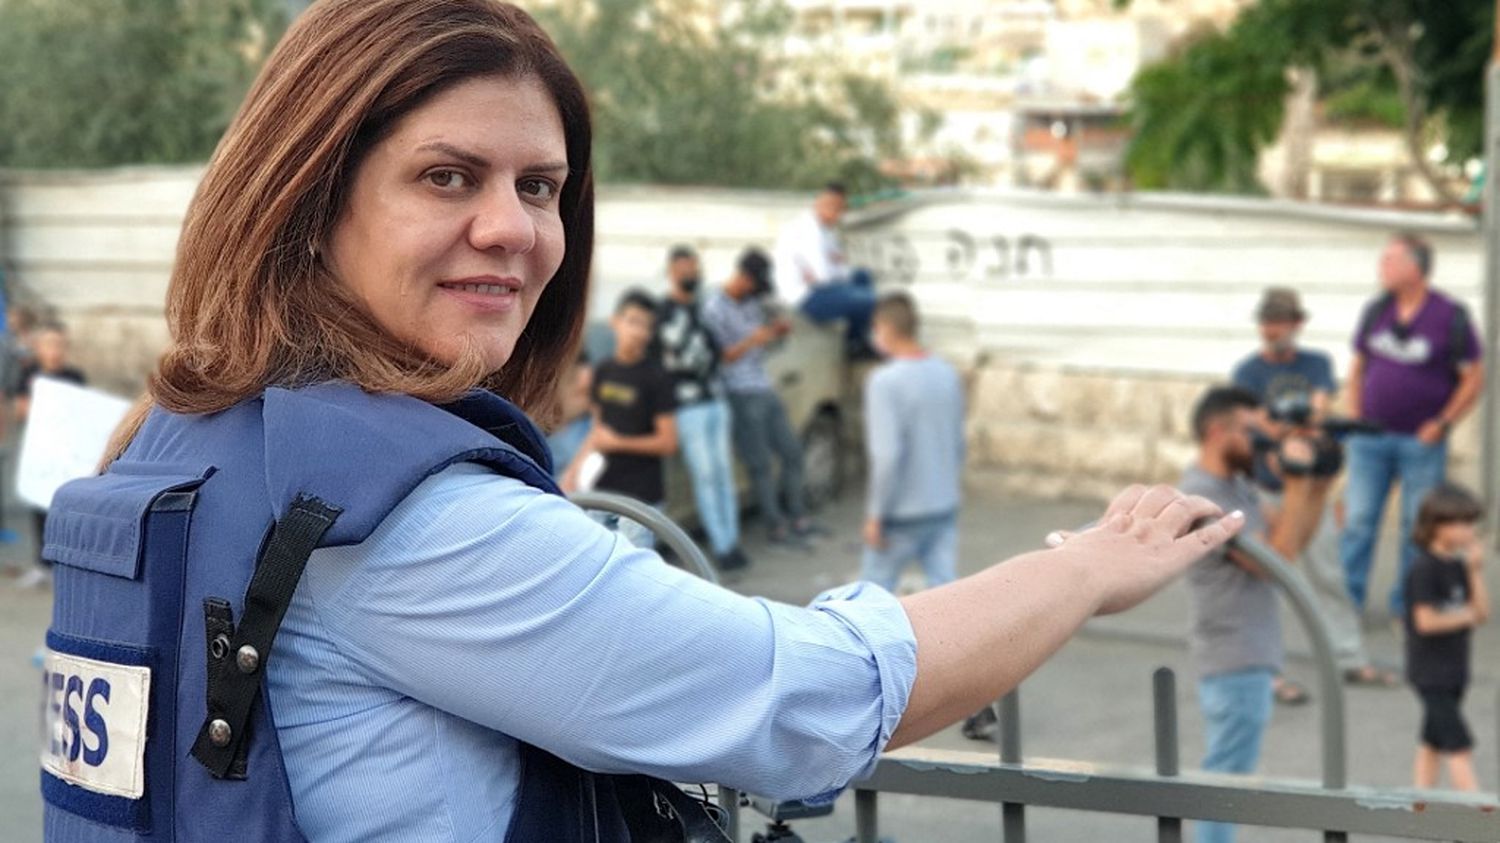 France, the United States and the EU call for an investigation into the death in the West Bank of Shireen Abu Akleh, an American-Palestinian journalist
